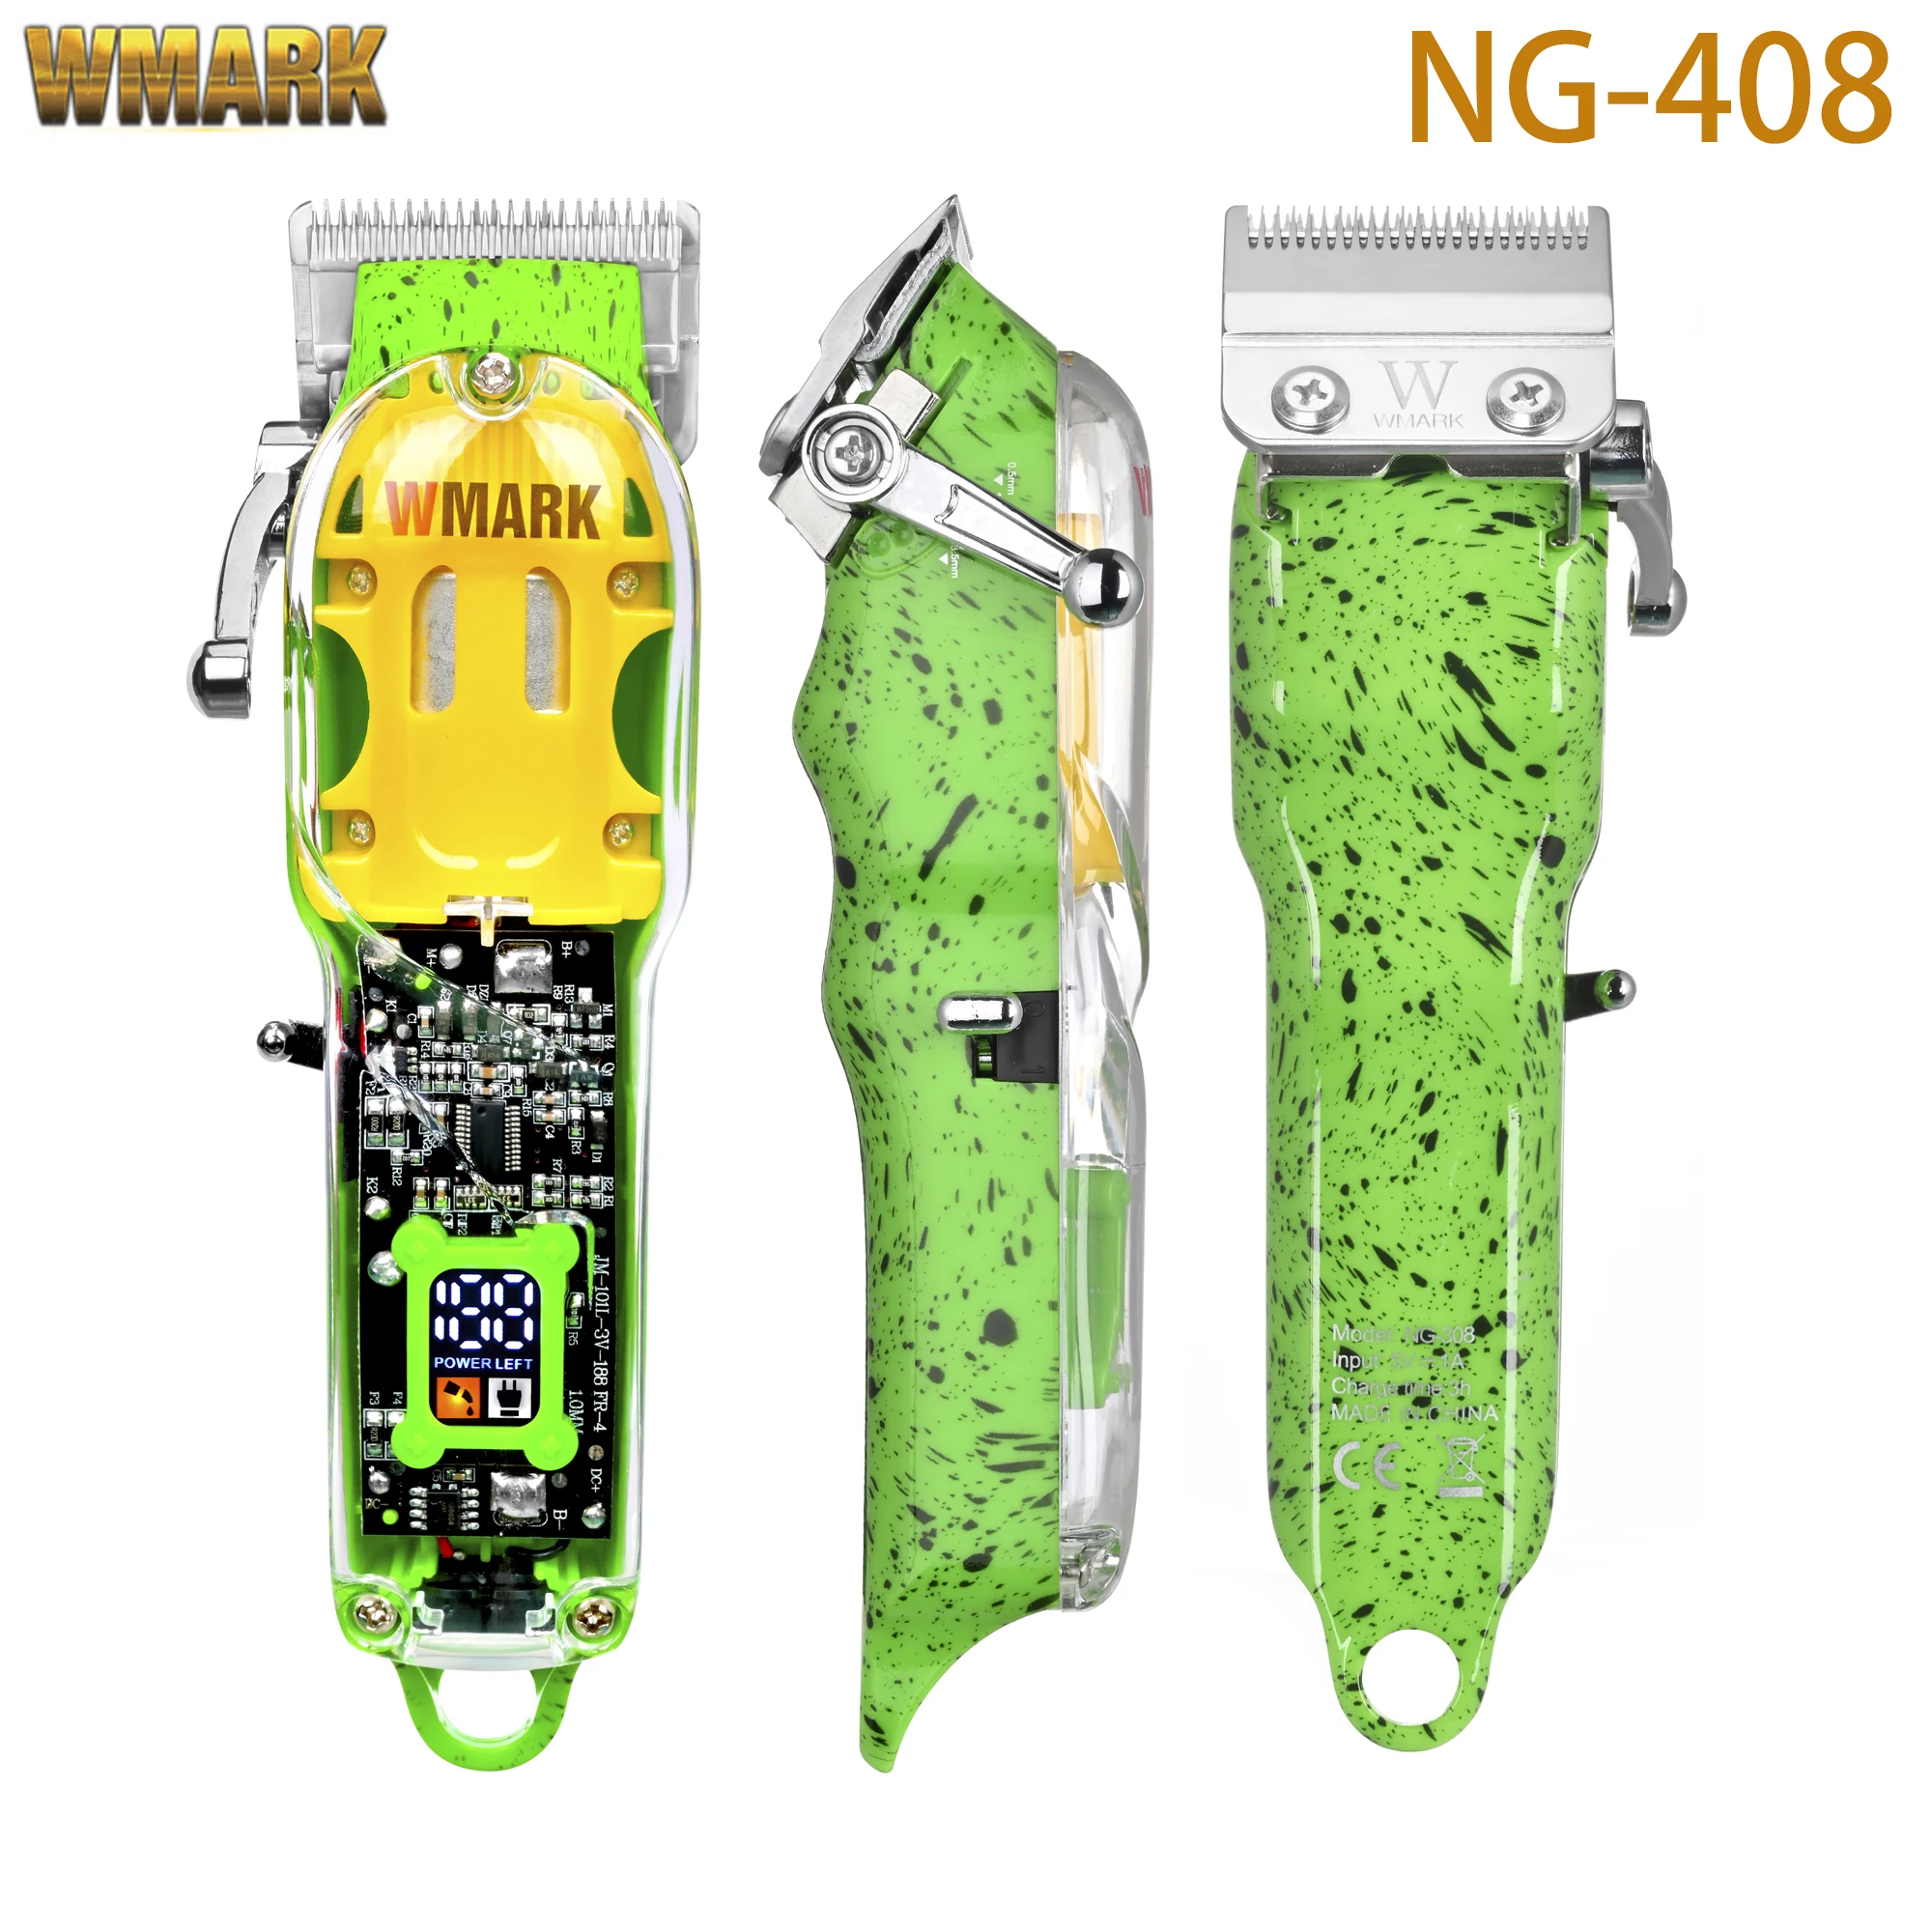 Enlarge WMARK NG-408 Transparent Hair Clipper Professional Rechargeable Clipper Hair Trimmer With LED Power Display 6500 RPM Motor Speed